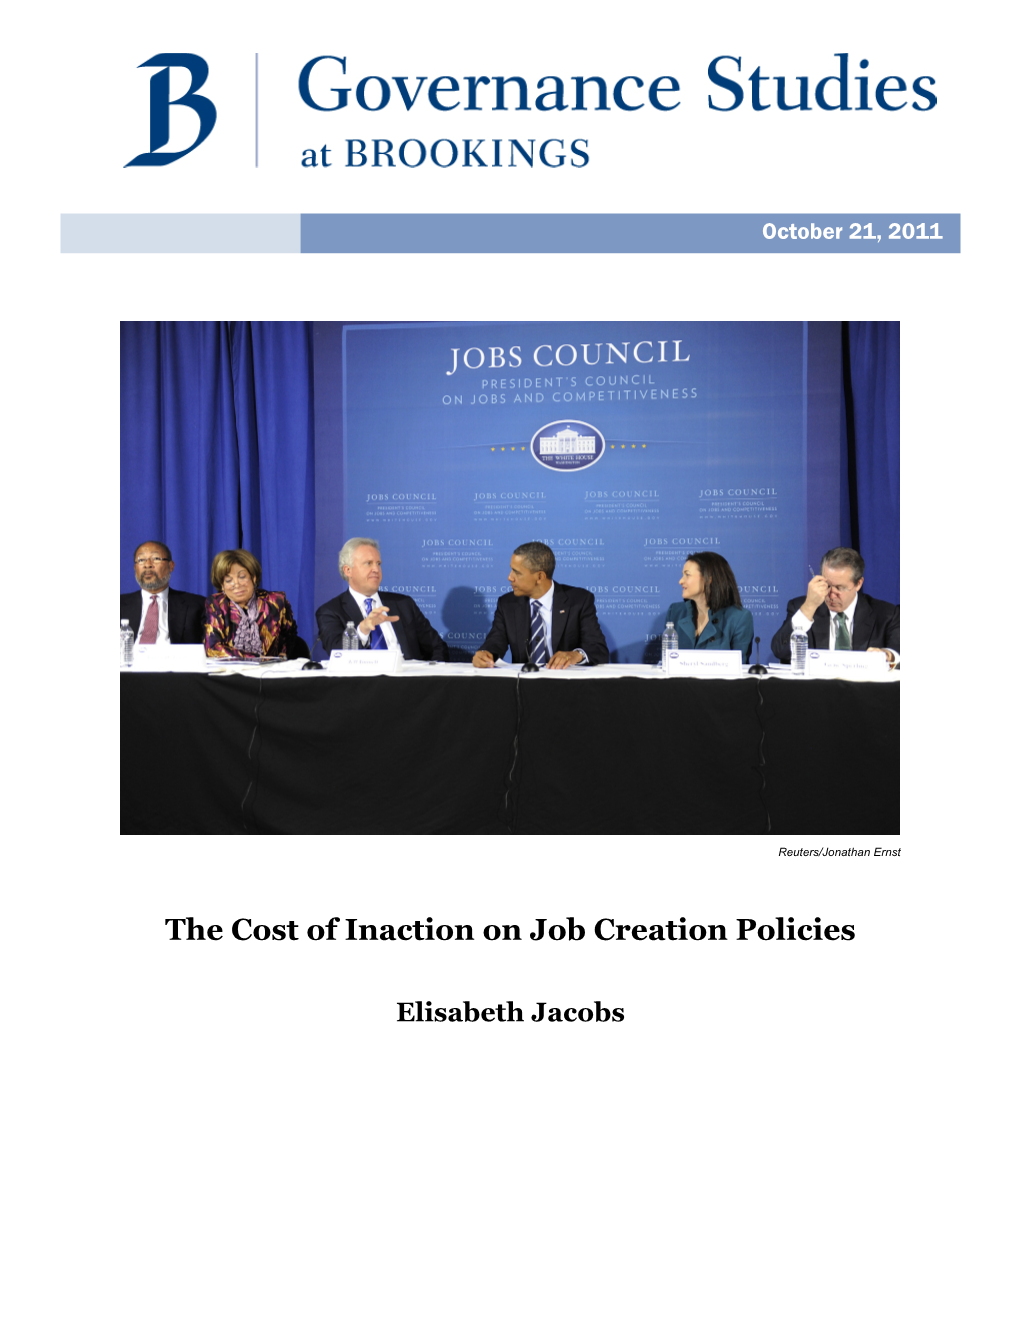 The Cost of Inaction on Job Creation Policies